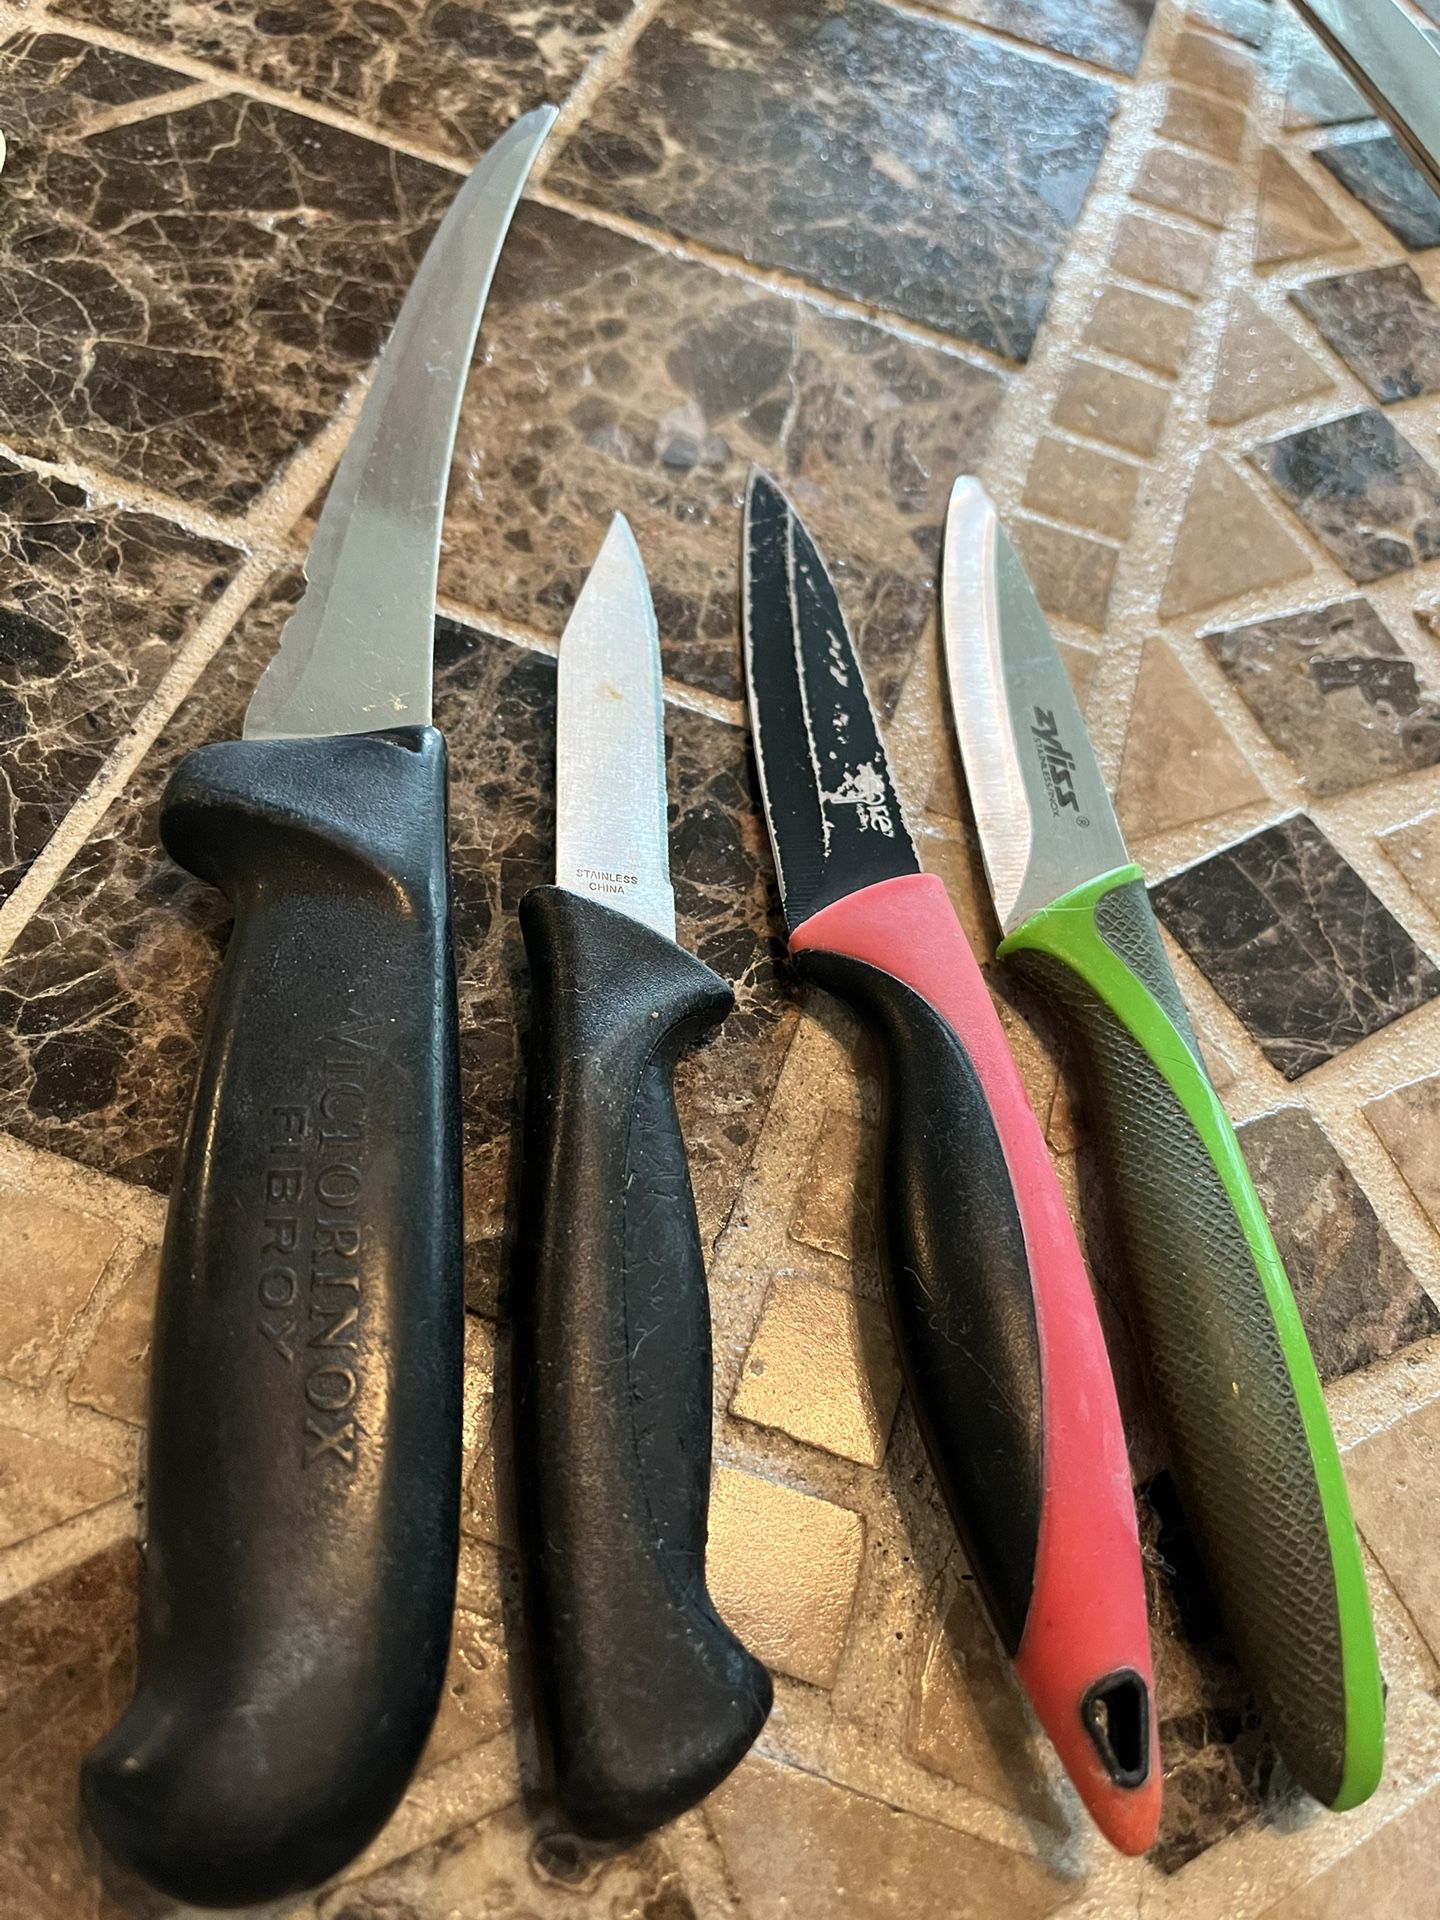 Knives All For 3.00